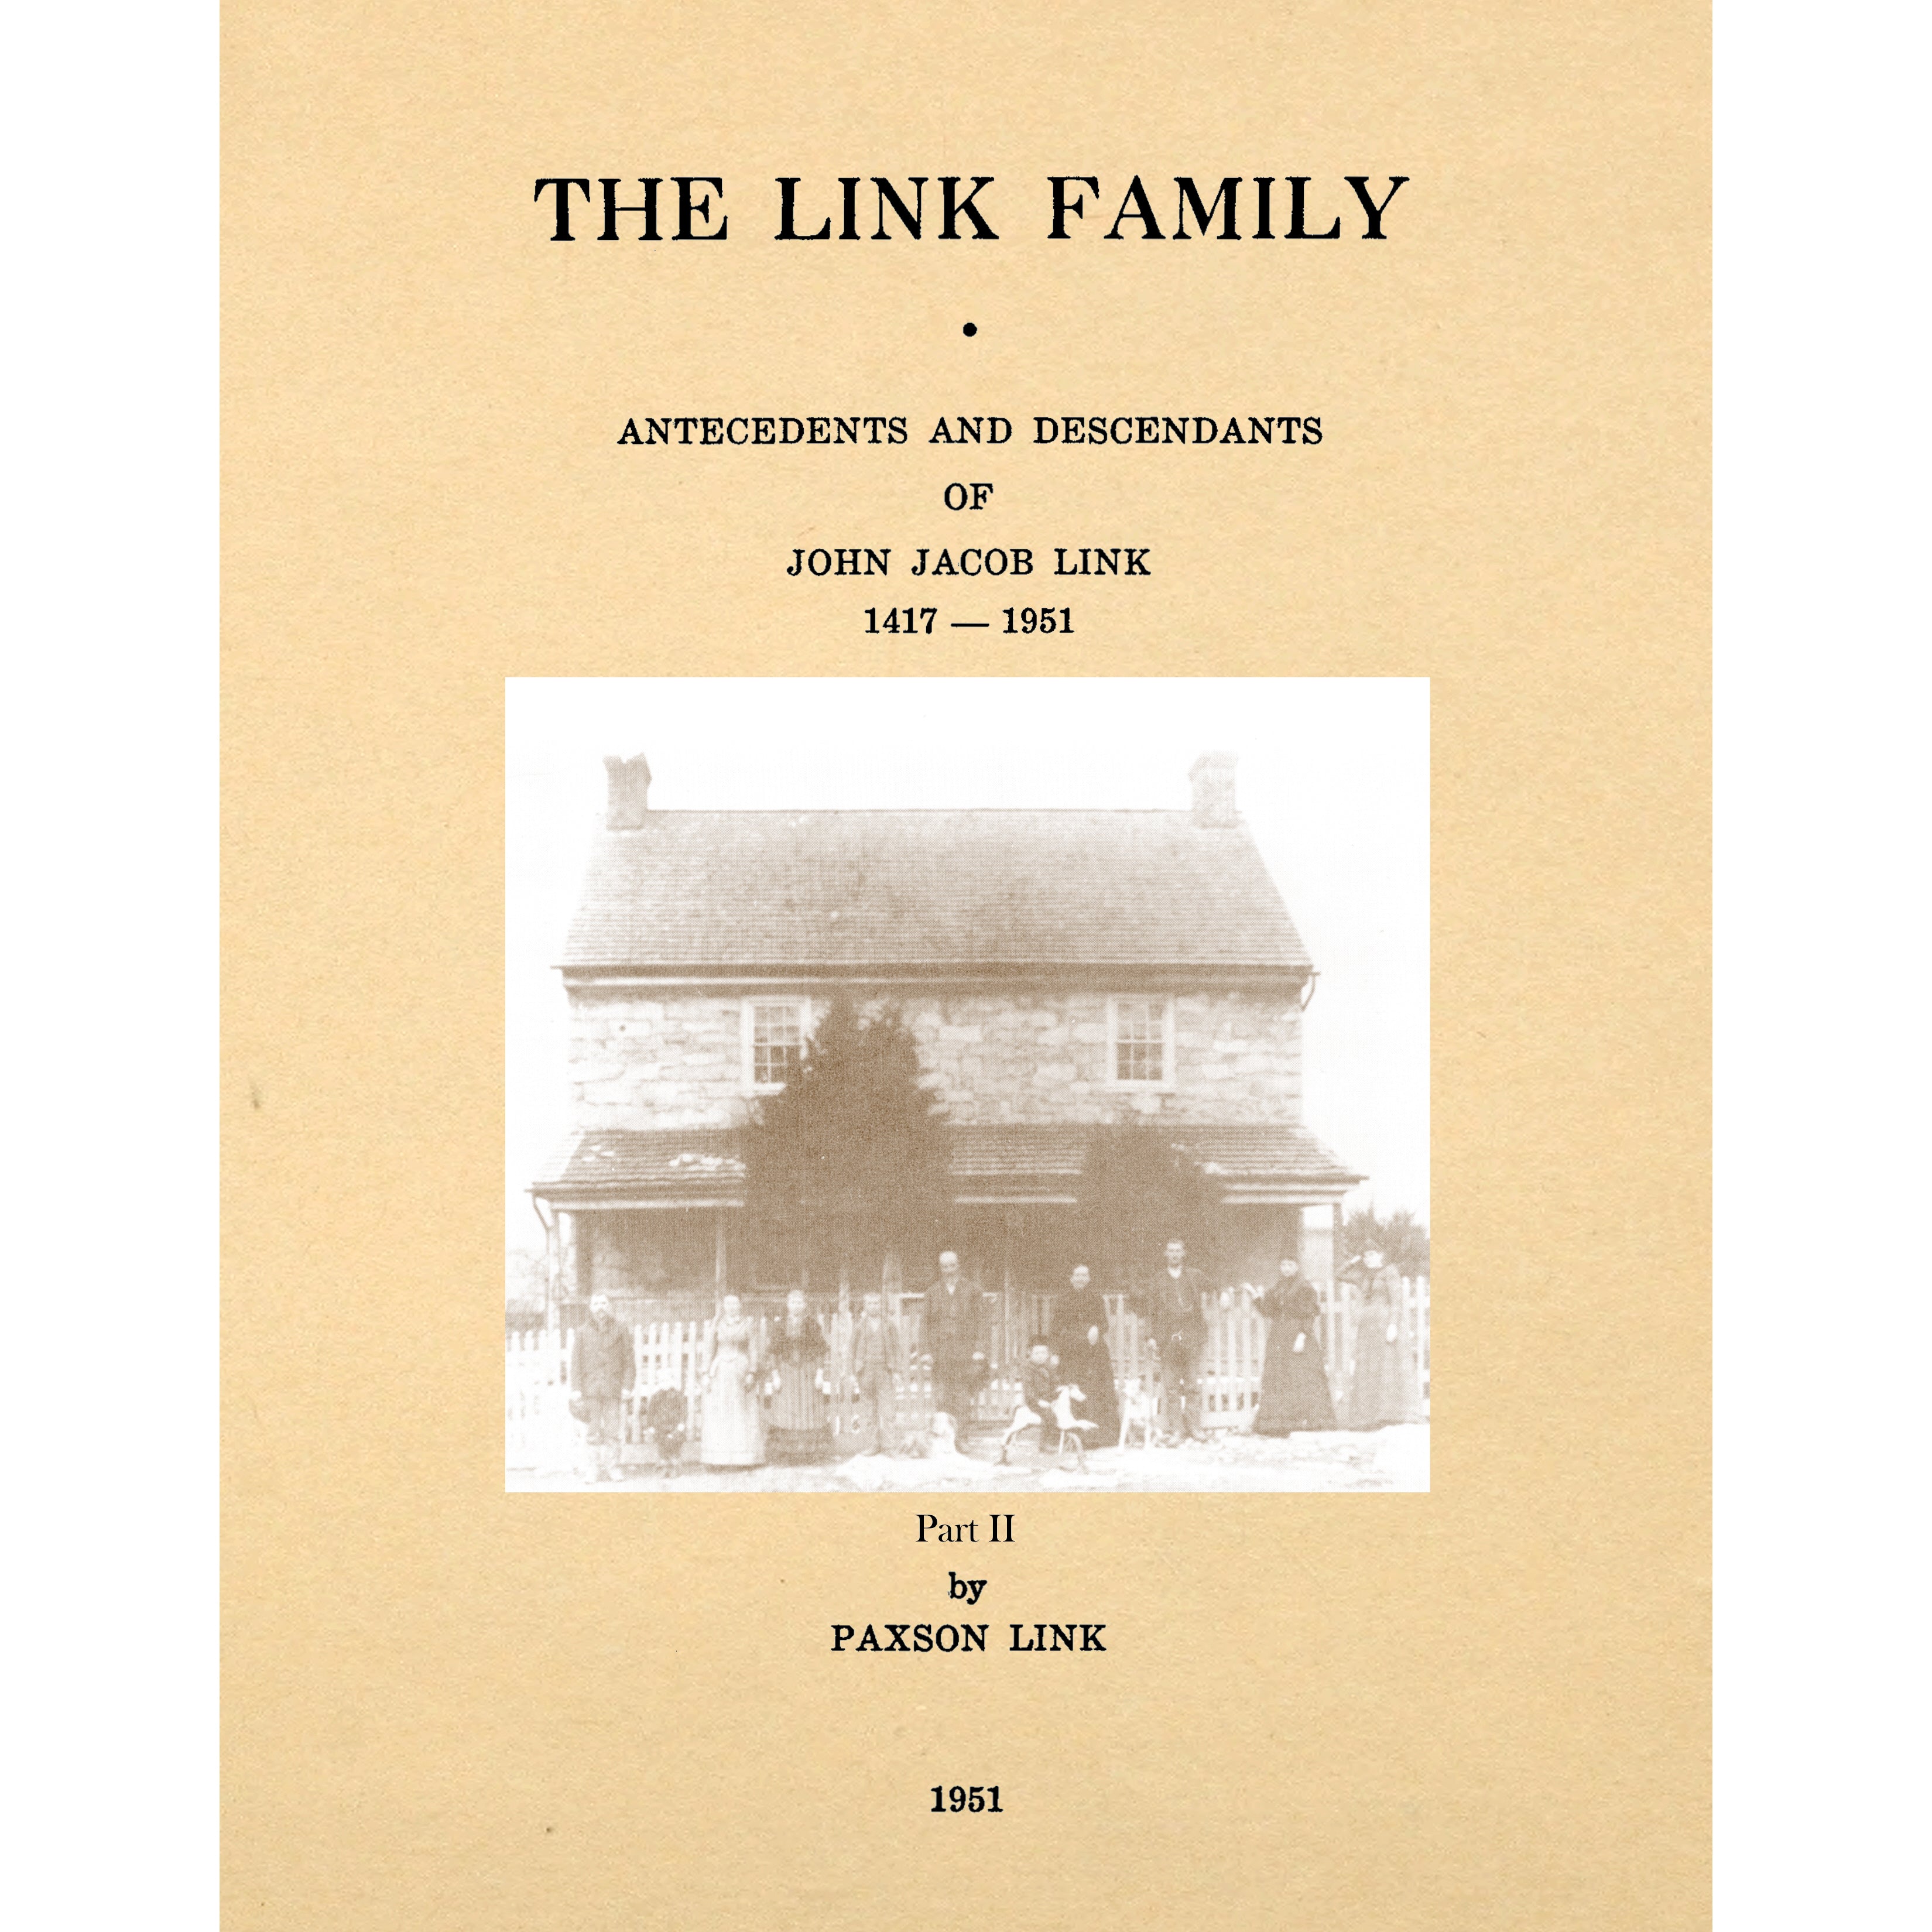 The Link Family Antecedents And Descendants Of John Jacob Link 1417 -